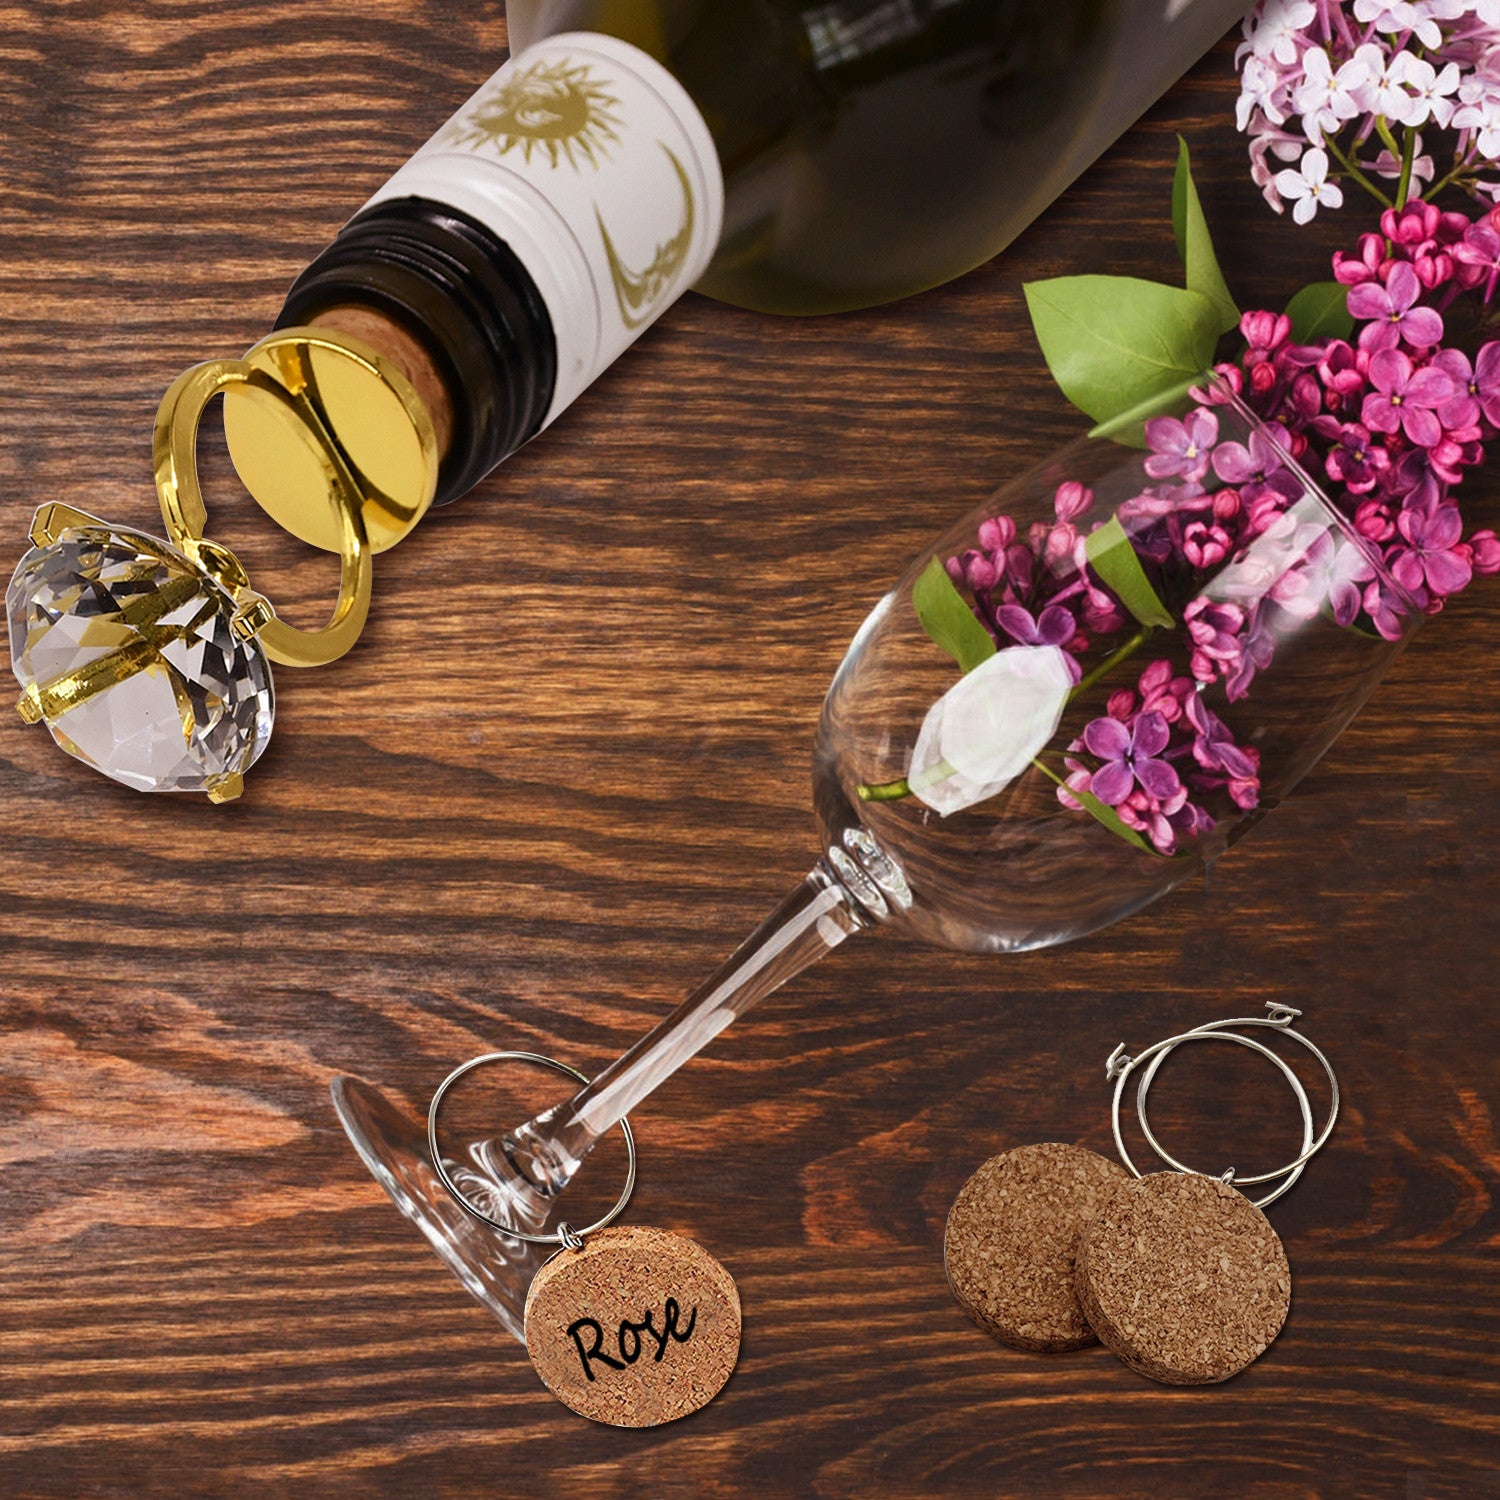 Aylifu Wine Glass Charms,Set of 6 Letter Wine Glass Tag Decoration Ring  Cork Charms for Party Gathering